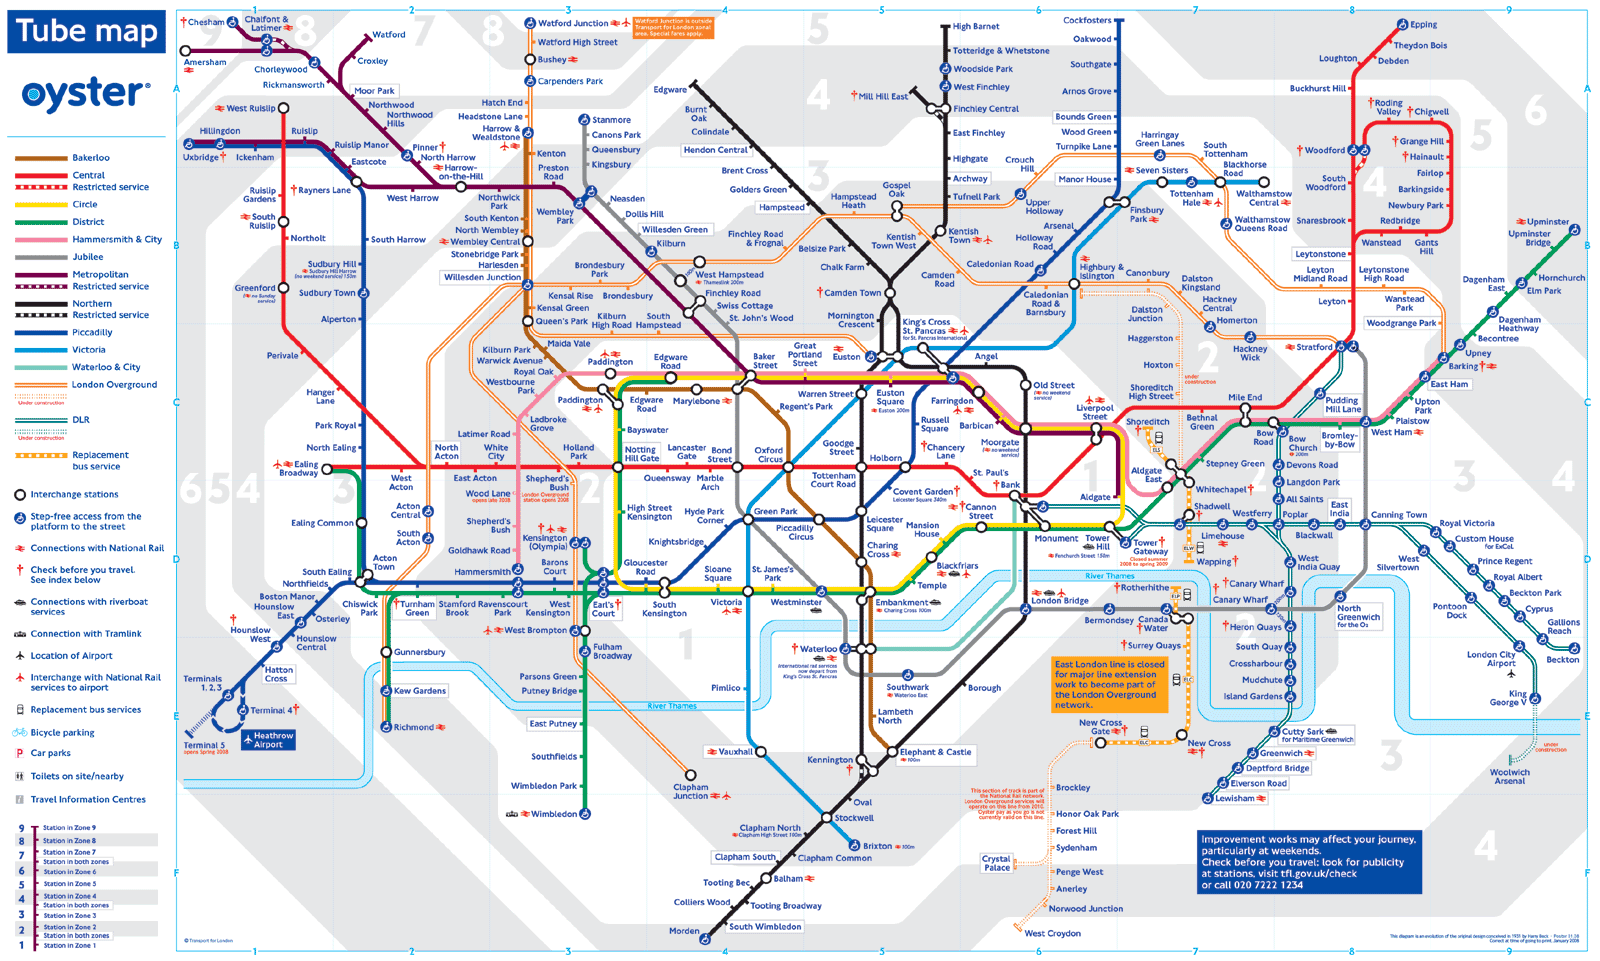 The London tube map - 15 meanings